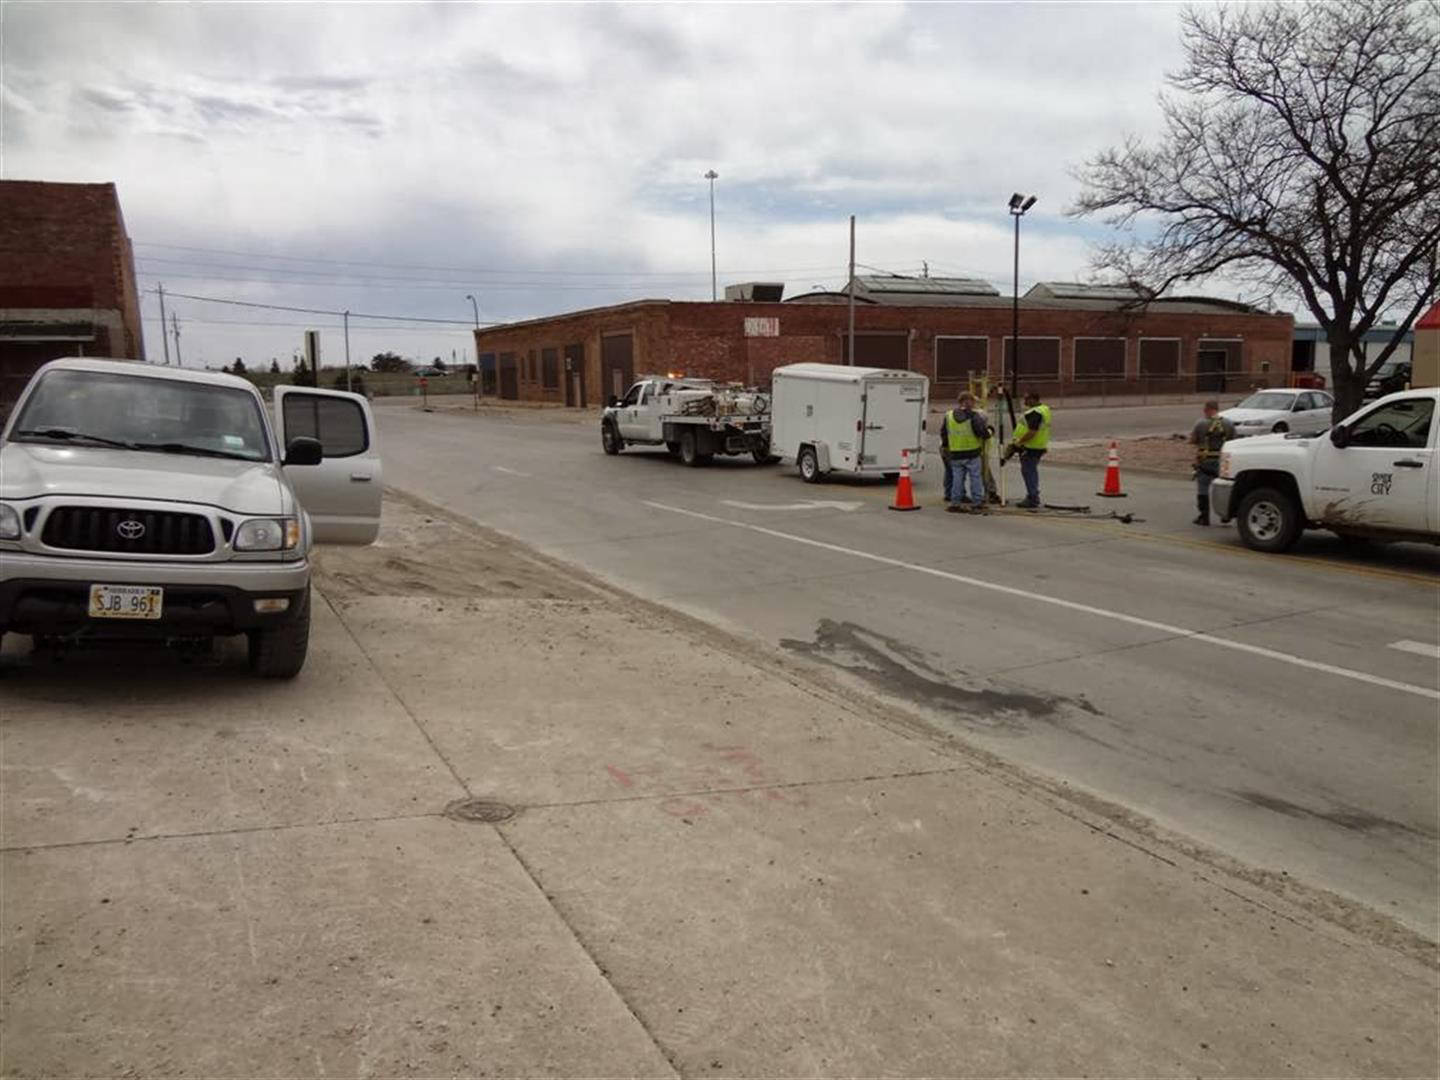 Sioux City, IA - Flow Study with Teledyne ISCO Laser Area Velocity Flow Meter